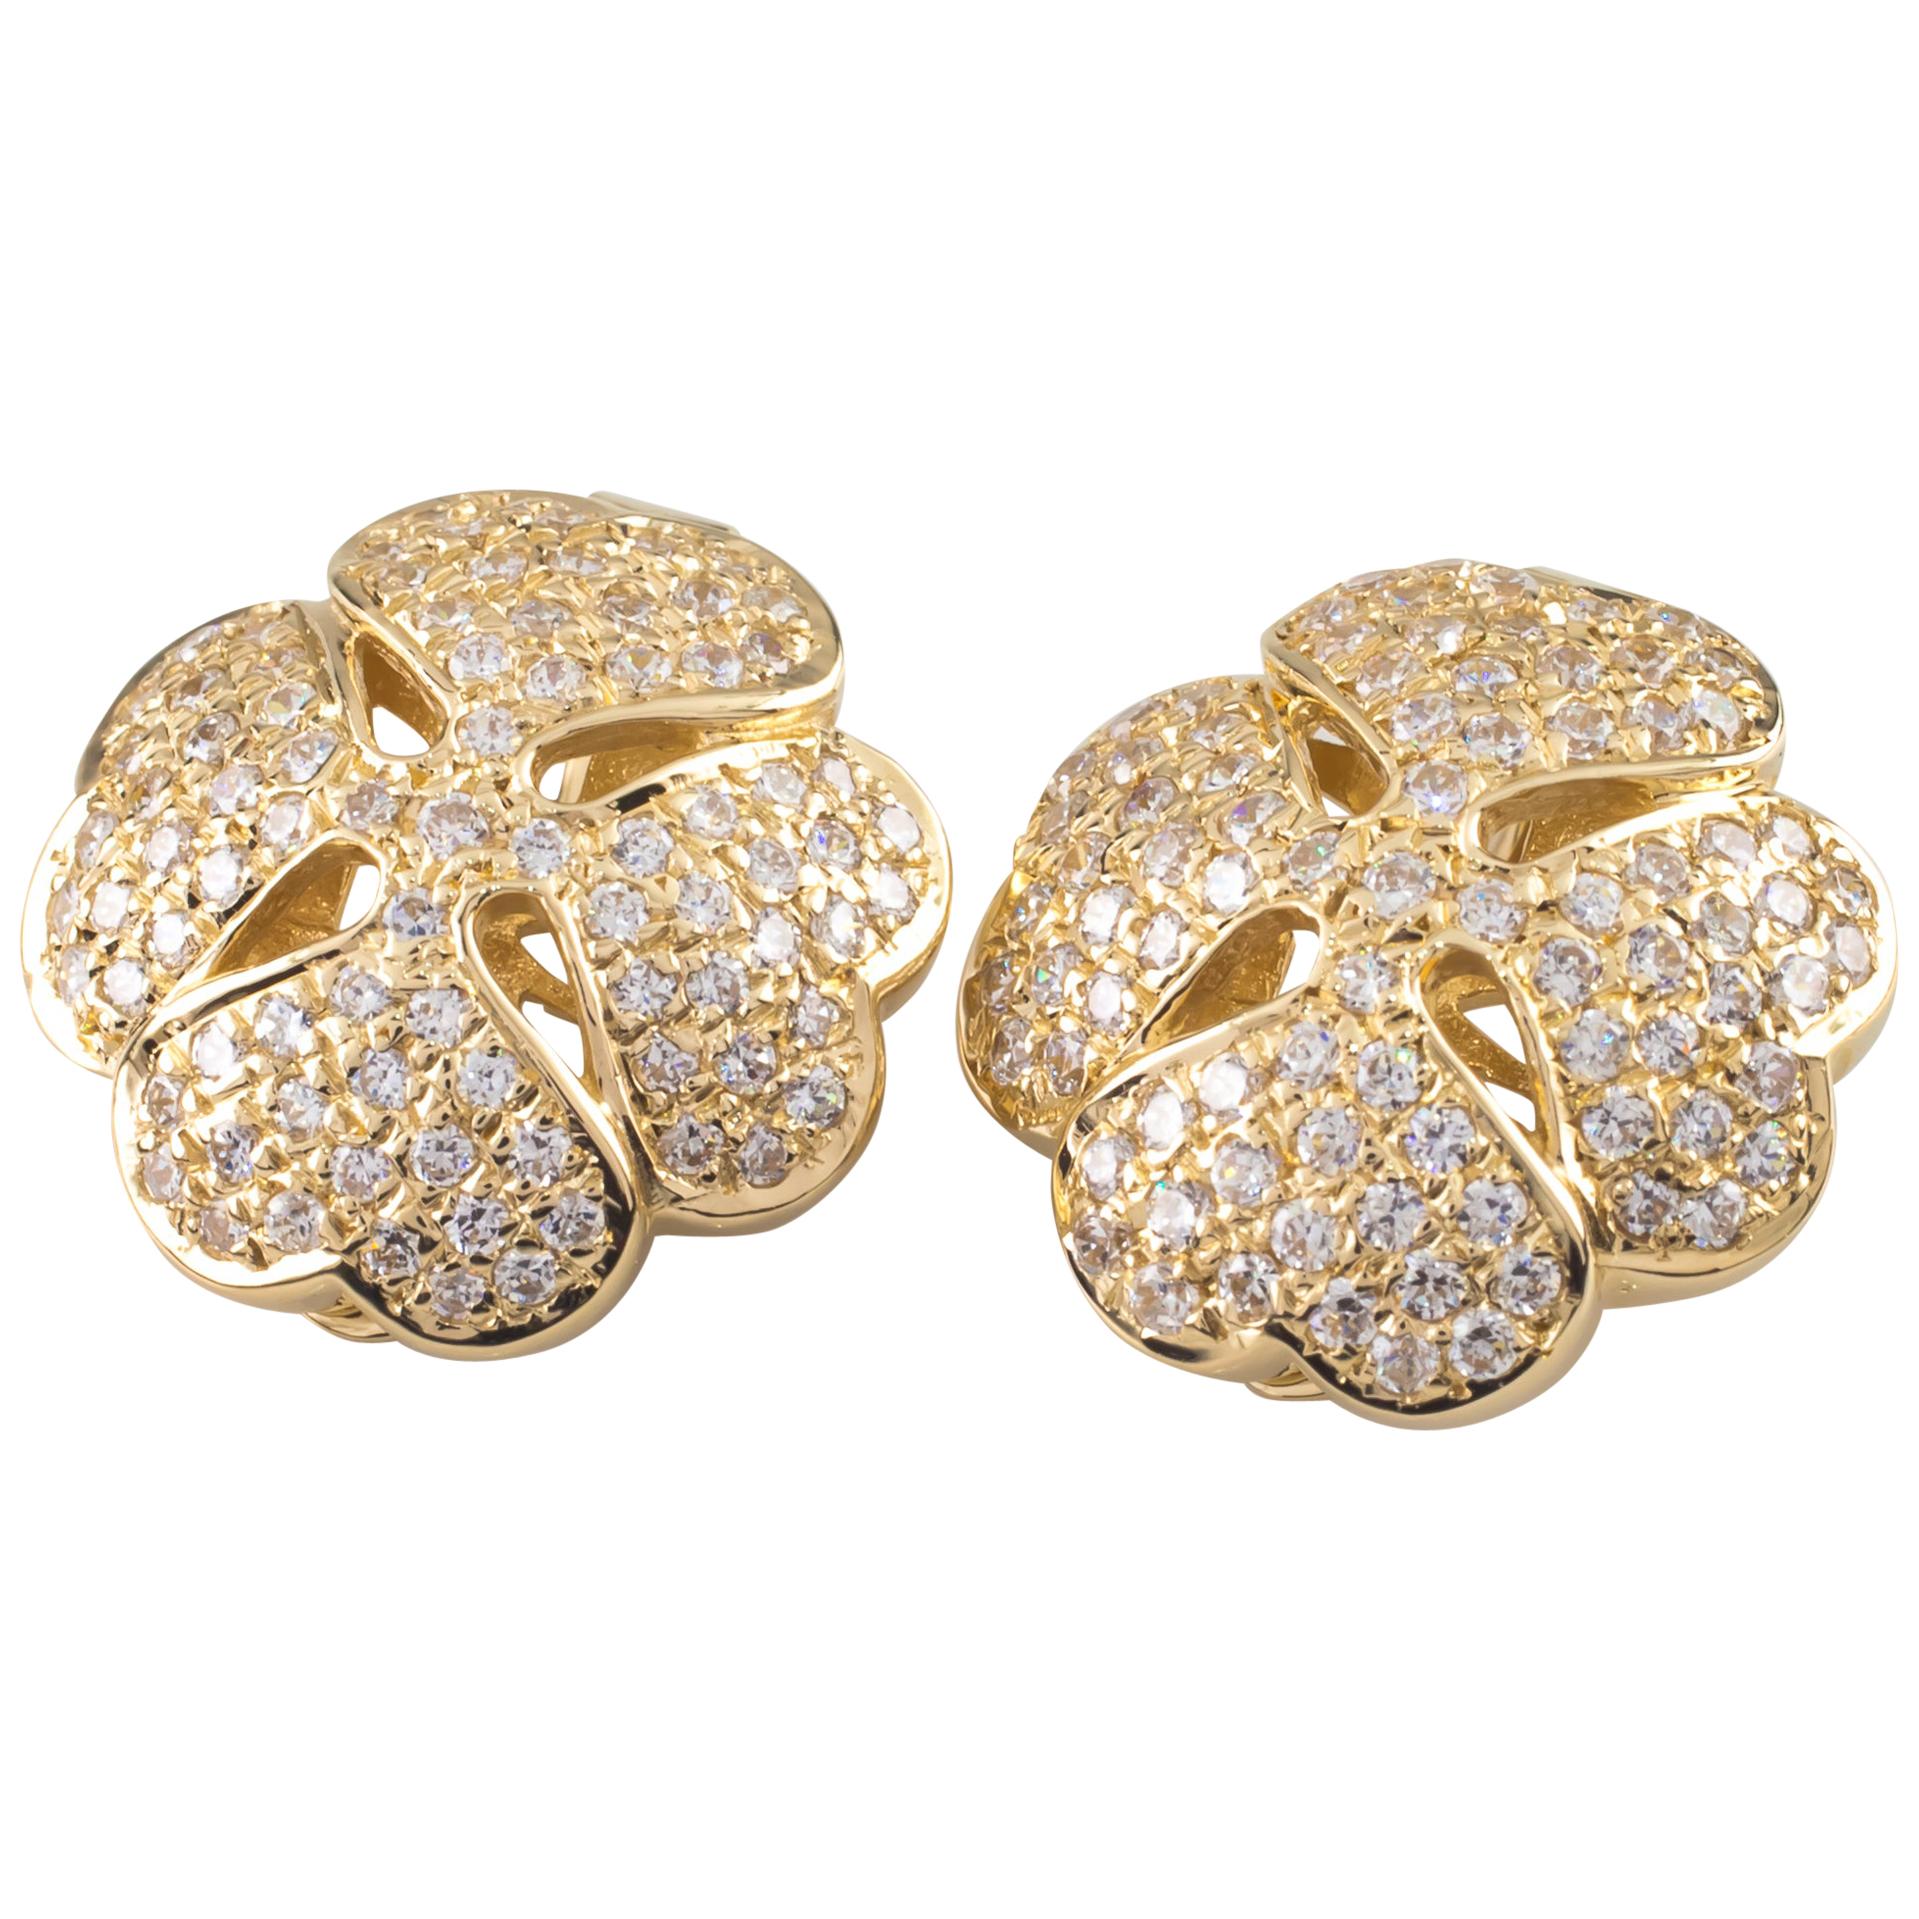 2.50 Carat Large Four Leaf Clover Pave Diamond Earrings in 14 Karat Yellow Gold